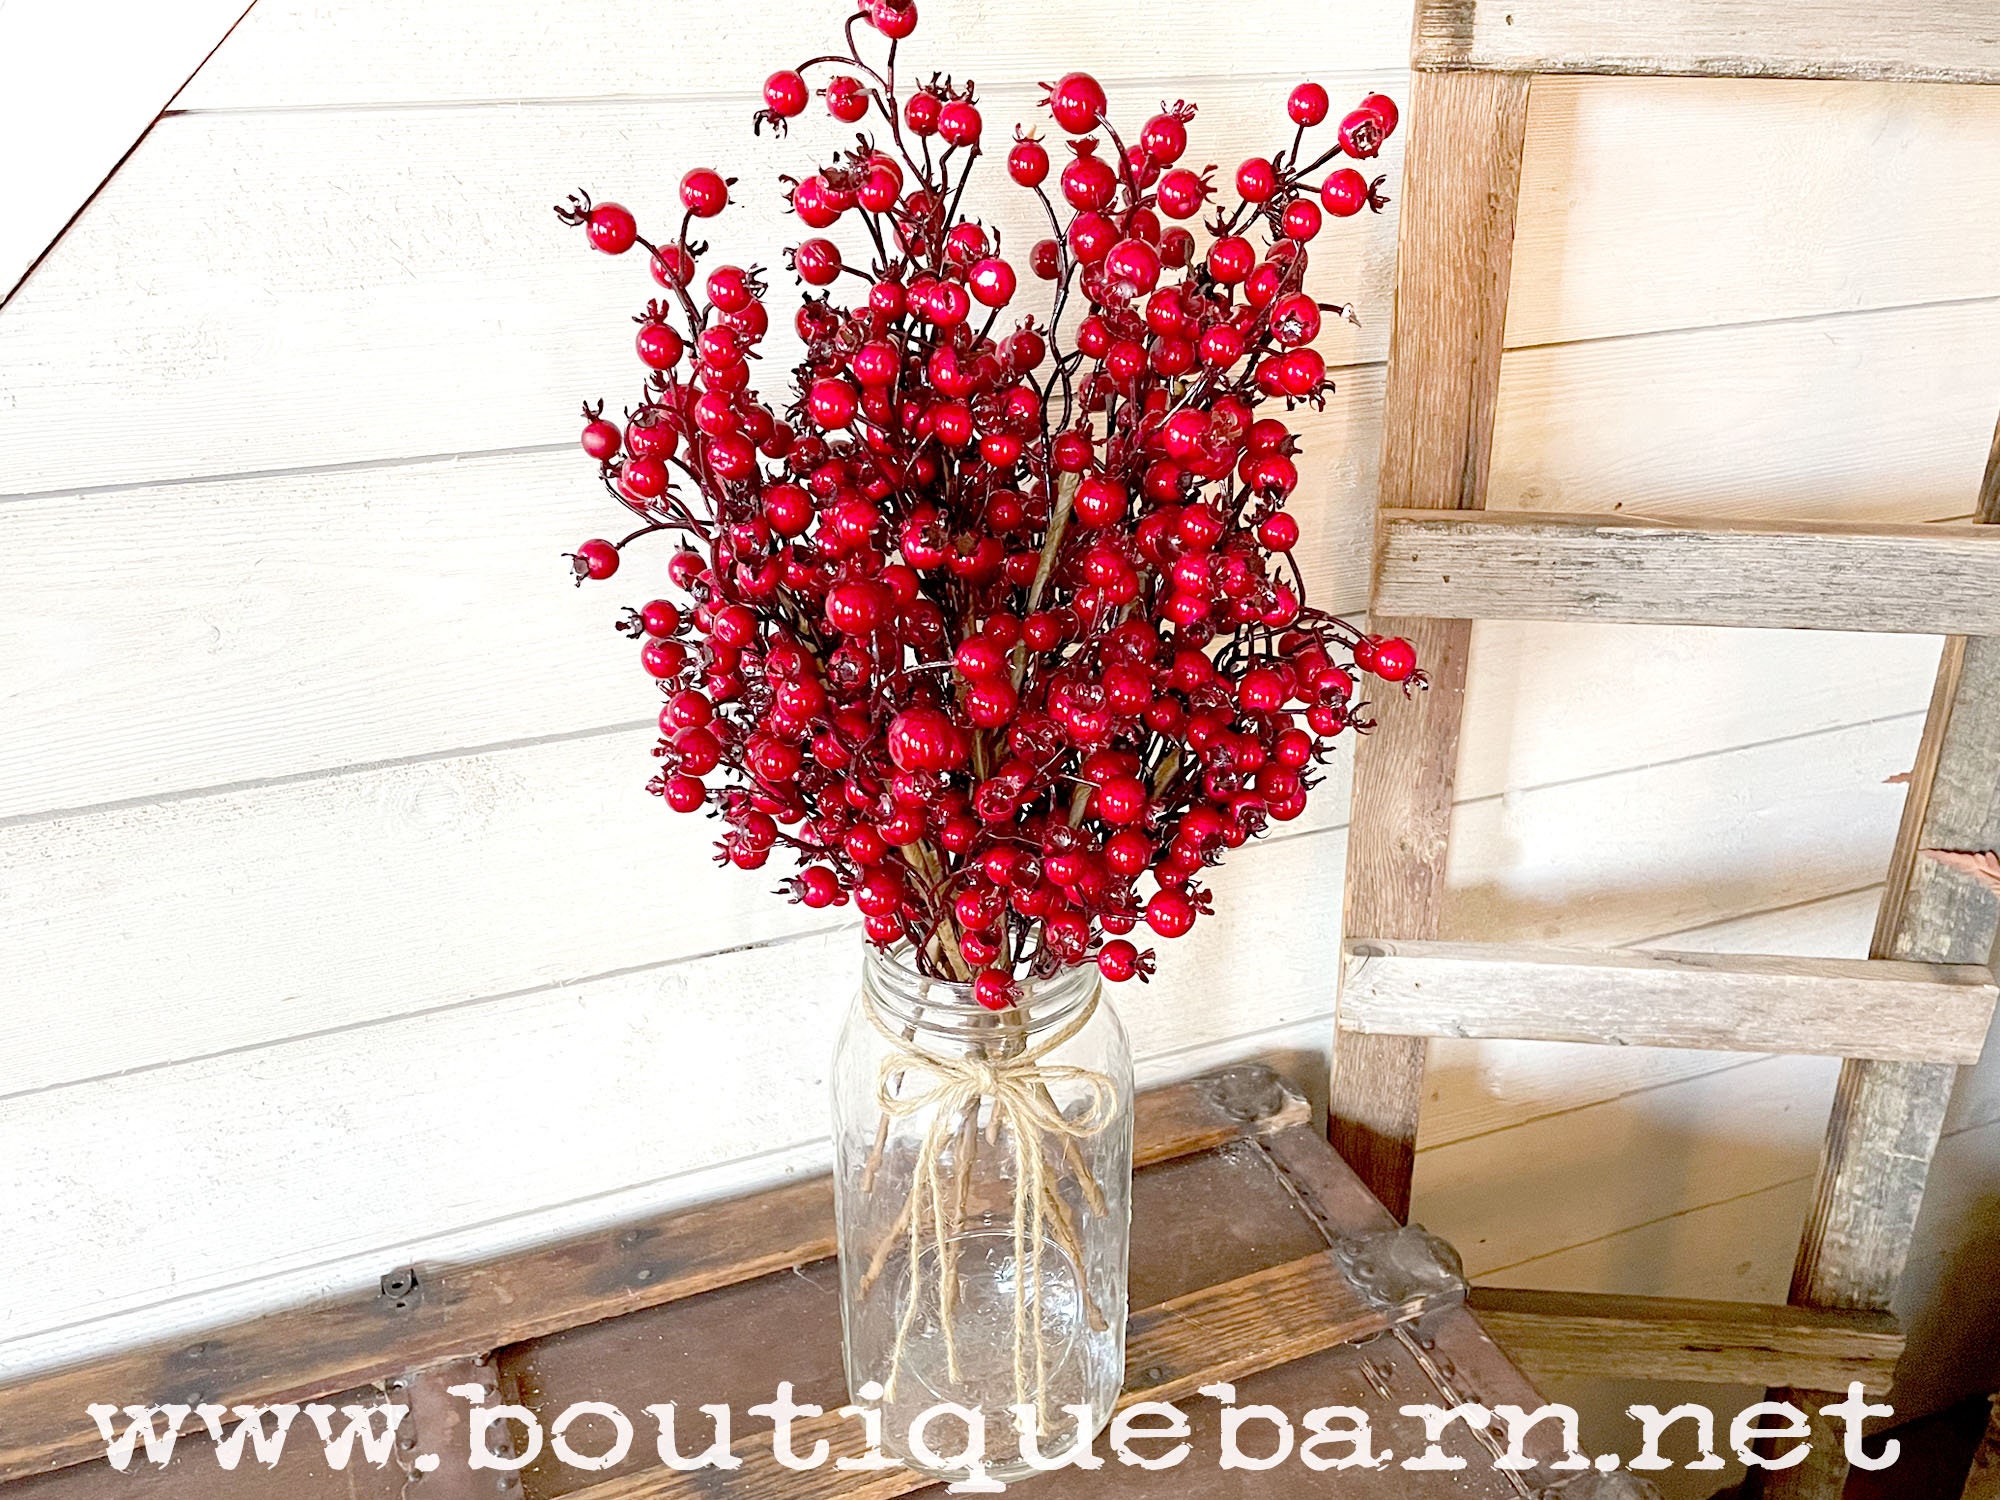 34 Red Berry Stems – Florist Wreath Supply